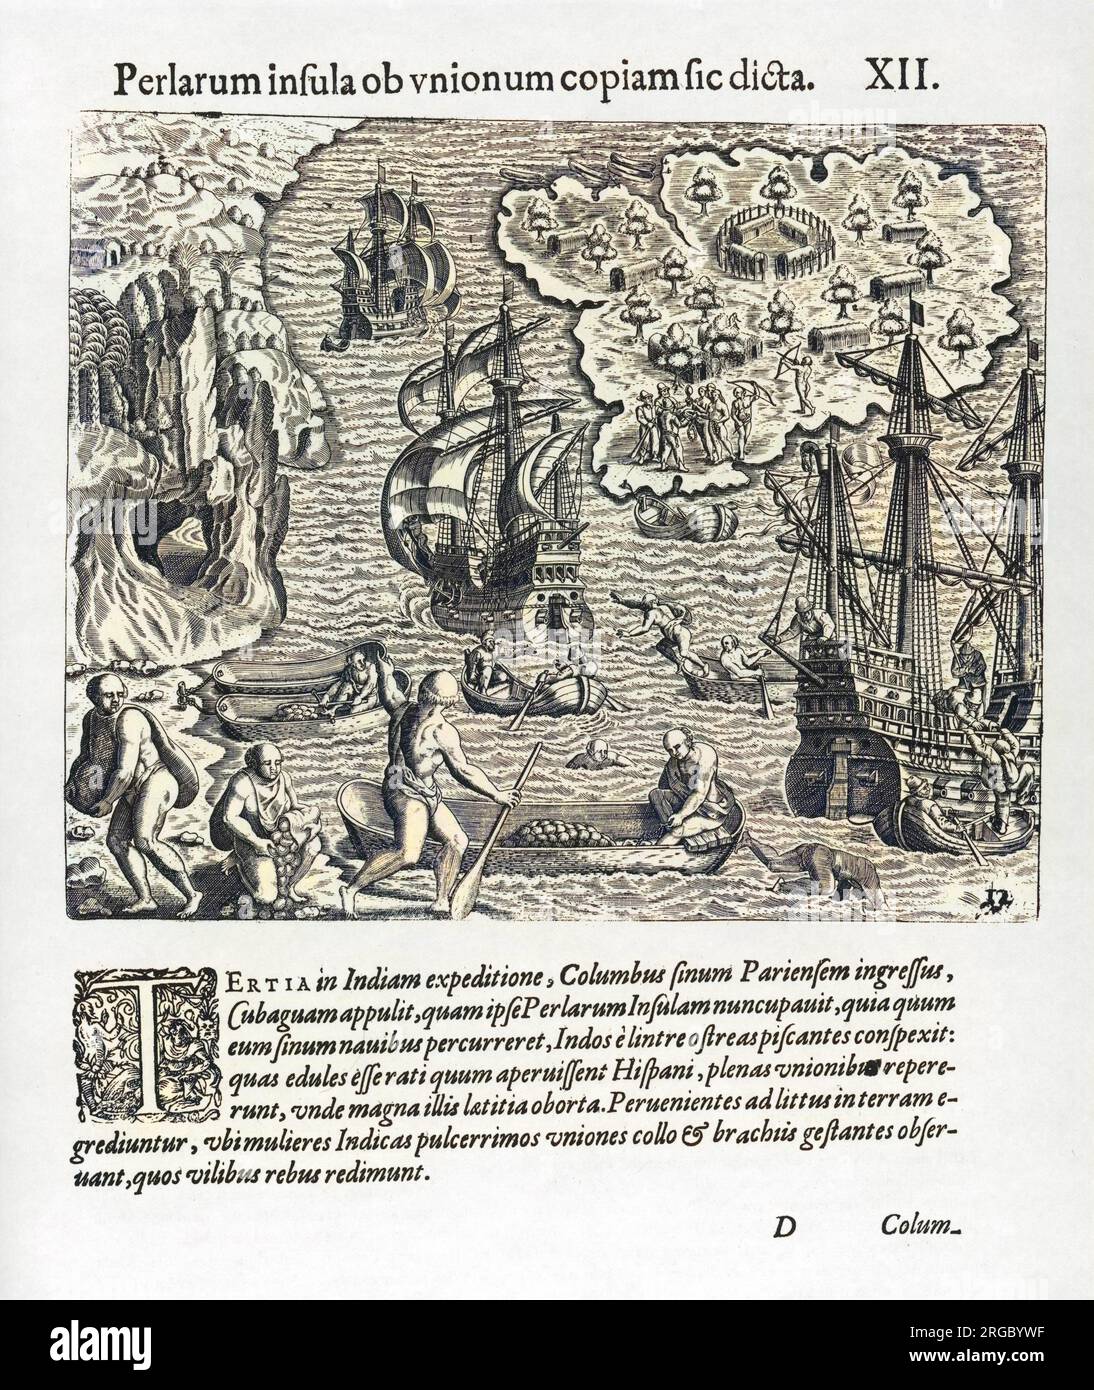 During his third voyage, Christopher Columbus discovers Cubagua, and names it 'Pearl Island' because of the abundance of pearl oysters Stock Photo